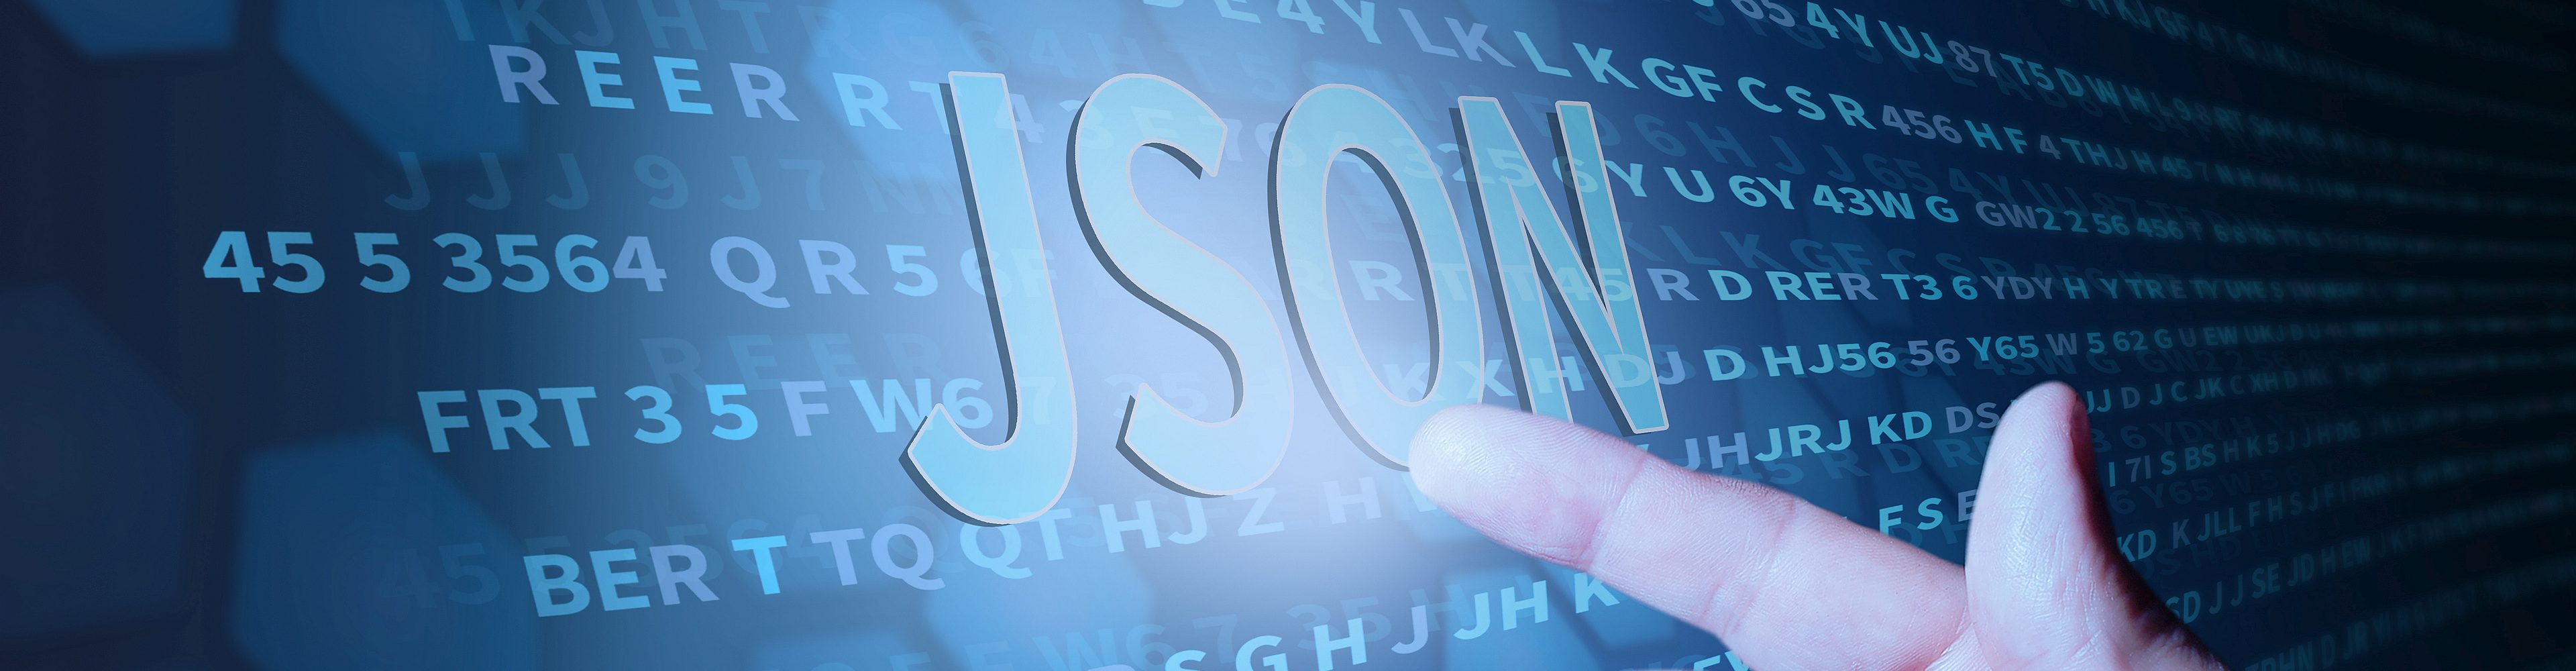 Pointing finger at the computer interface points to the term "JSON".